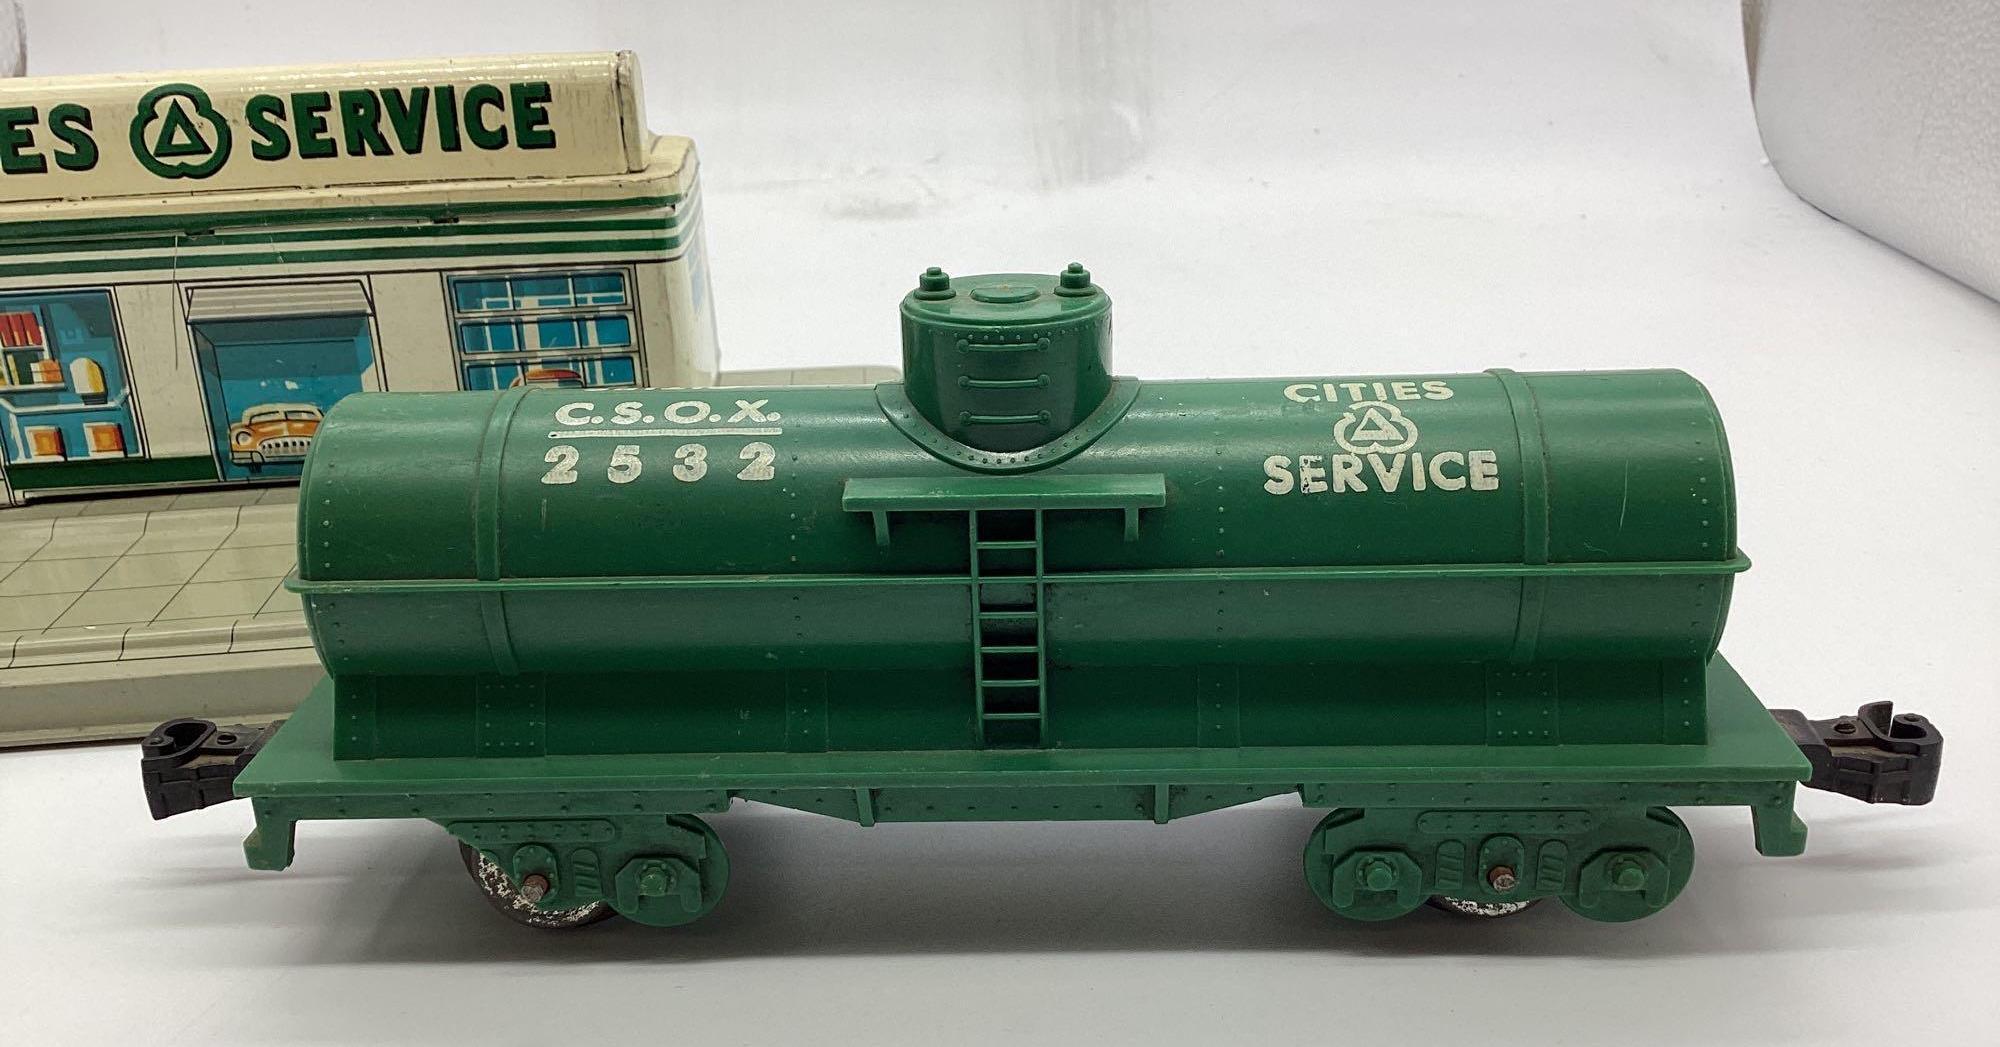 Cities Service Toy Service Station and Railroad Tank Car